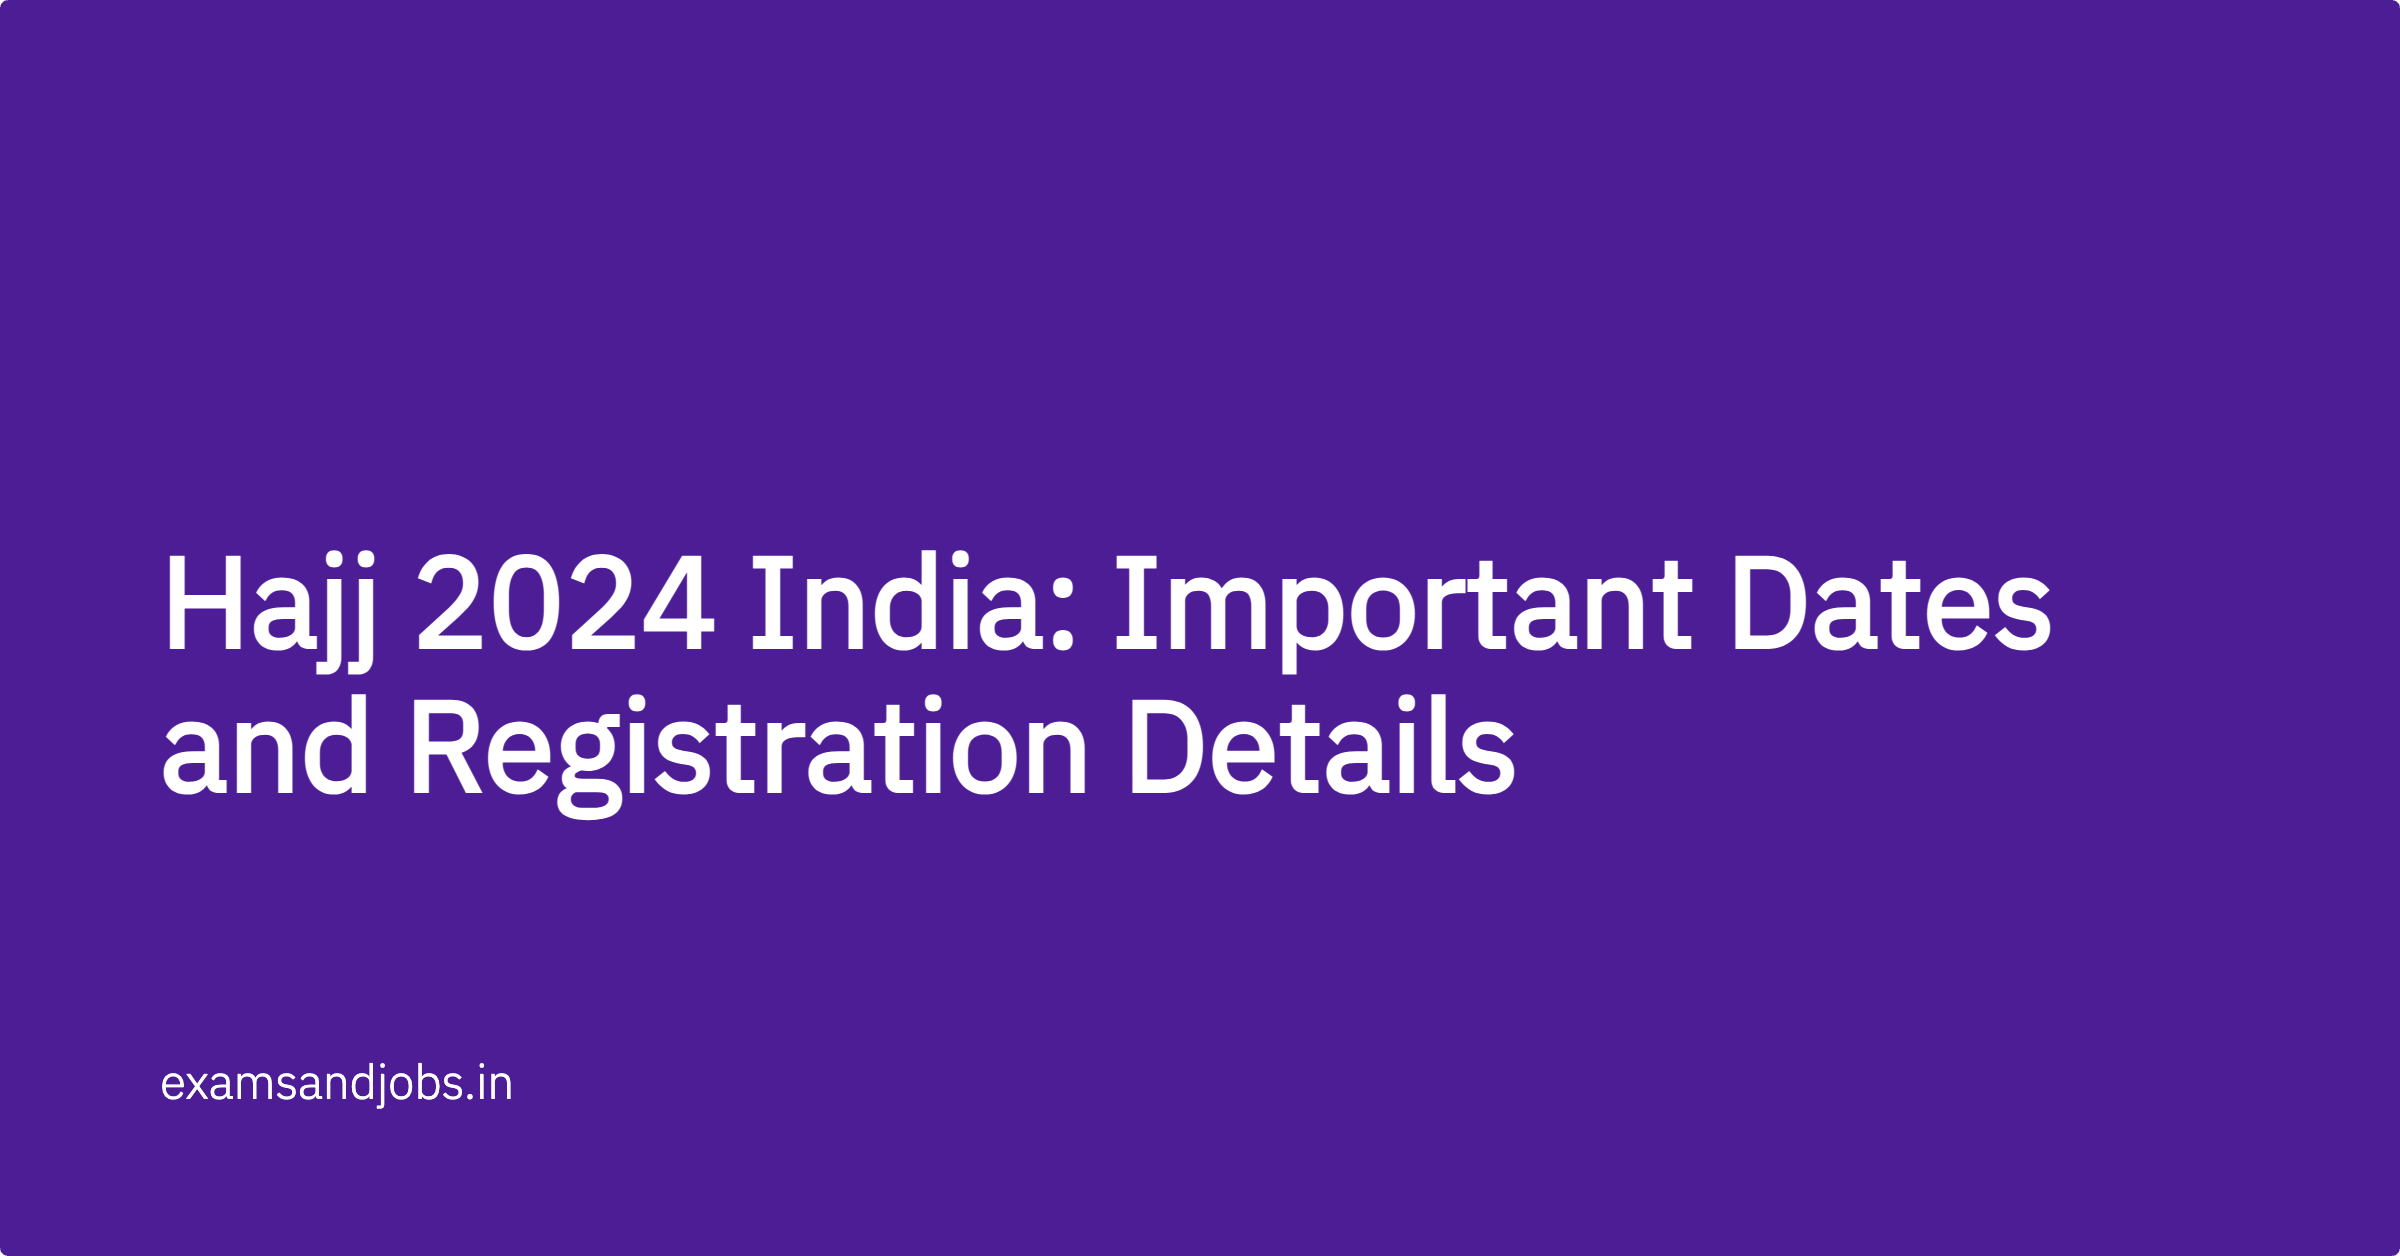 Hajj 2024 India Important Dates and Registration Details